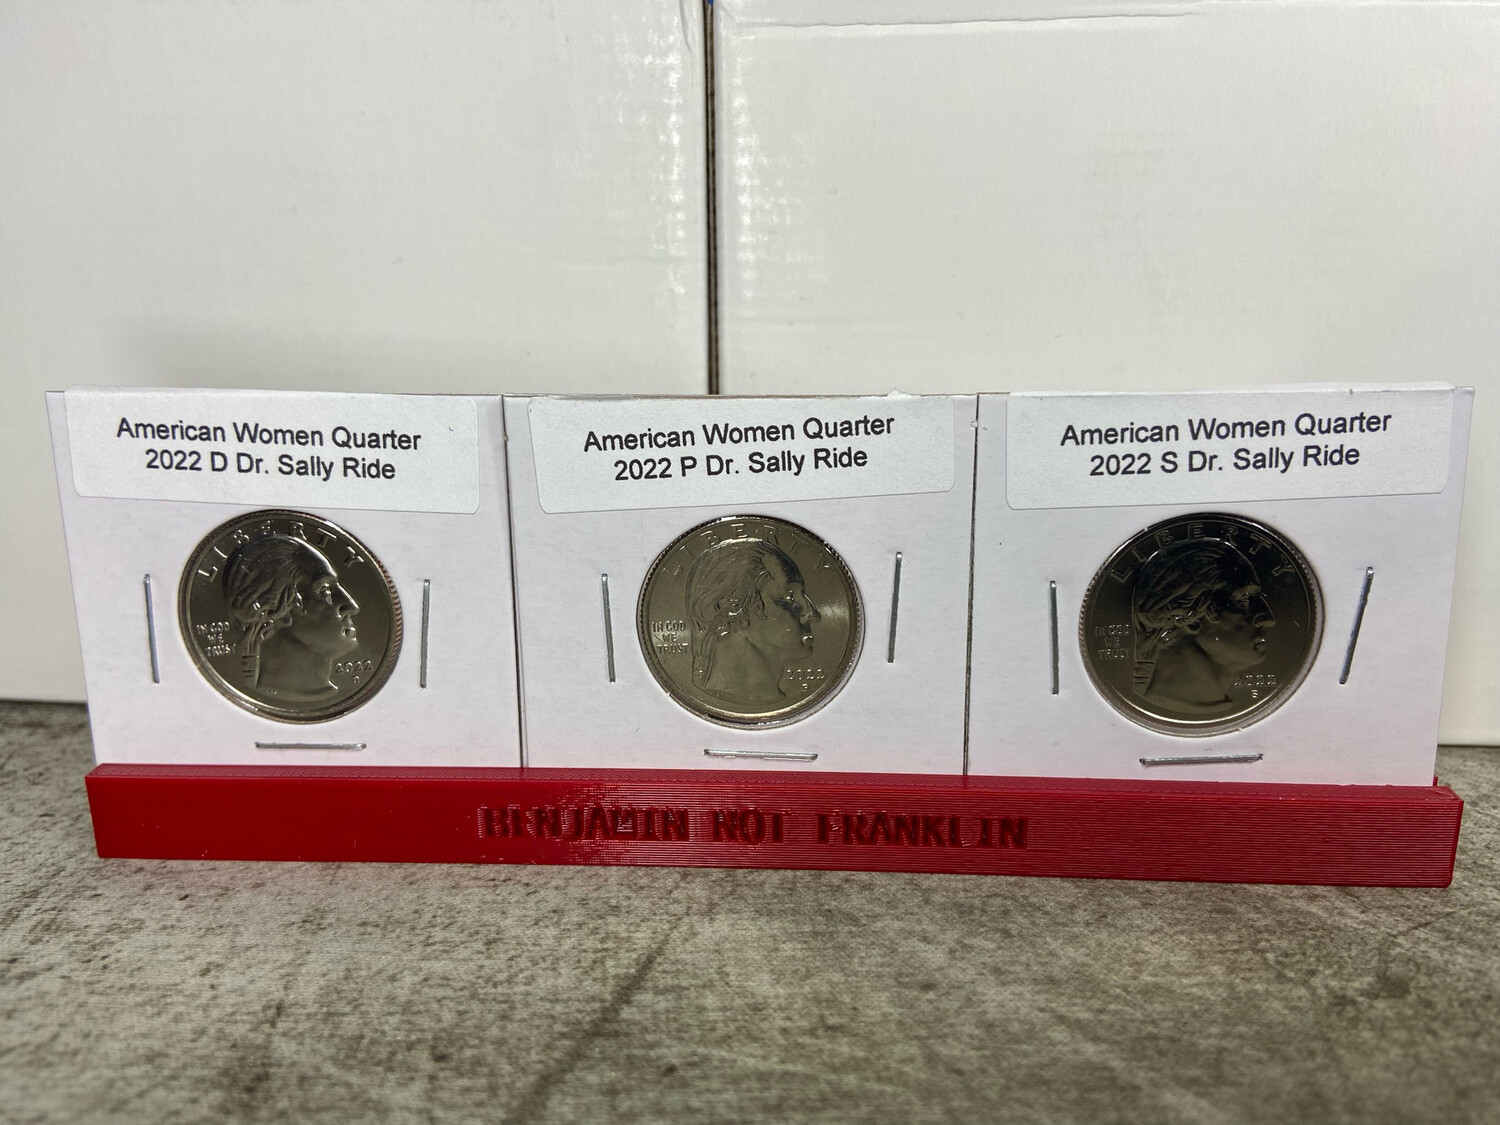 Sally Ride D S Dr 2022 P American Women Quarter Series 3 Coin Set in Red Velvet Bag Uncirculated 